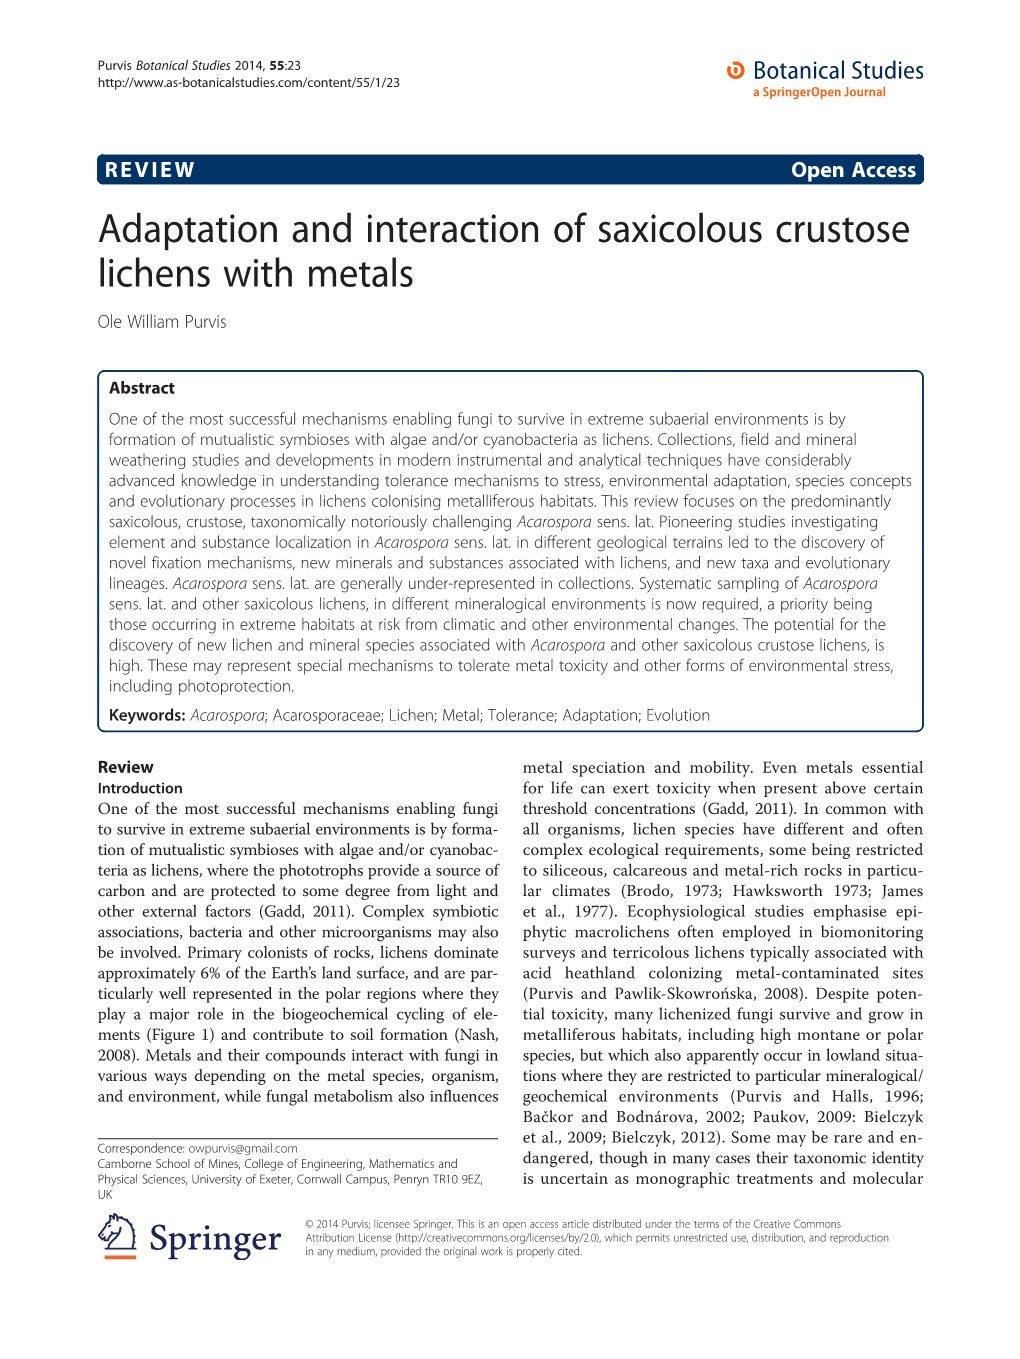 Adaptation and Interaction of Saxicolous Crustose Lichens with Metals Ole William Purvis